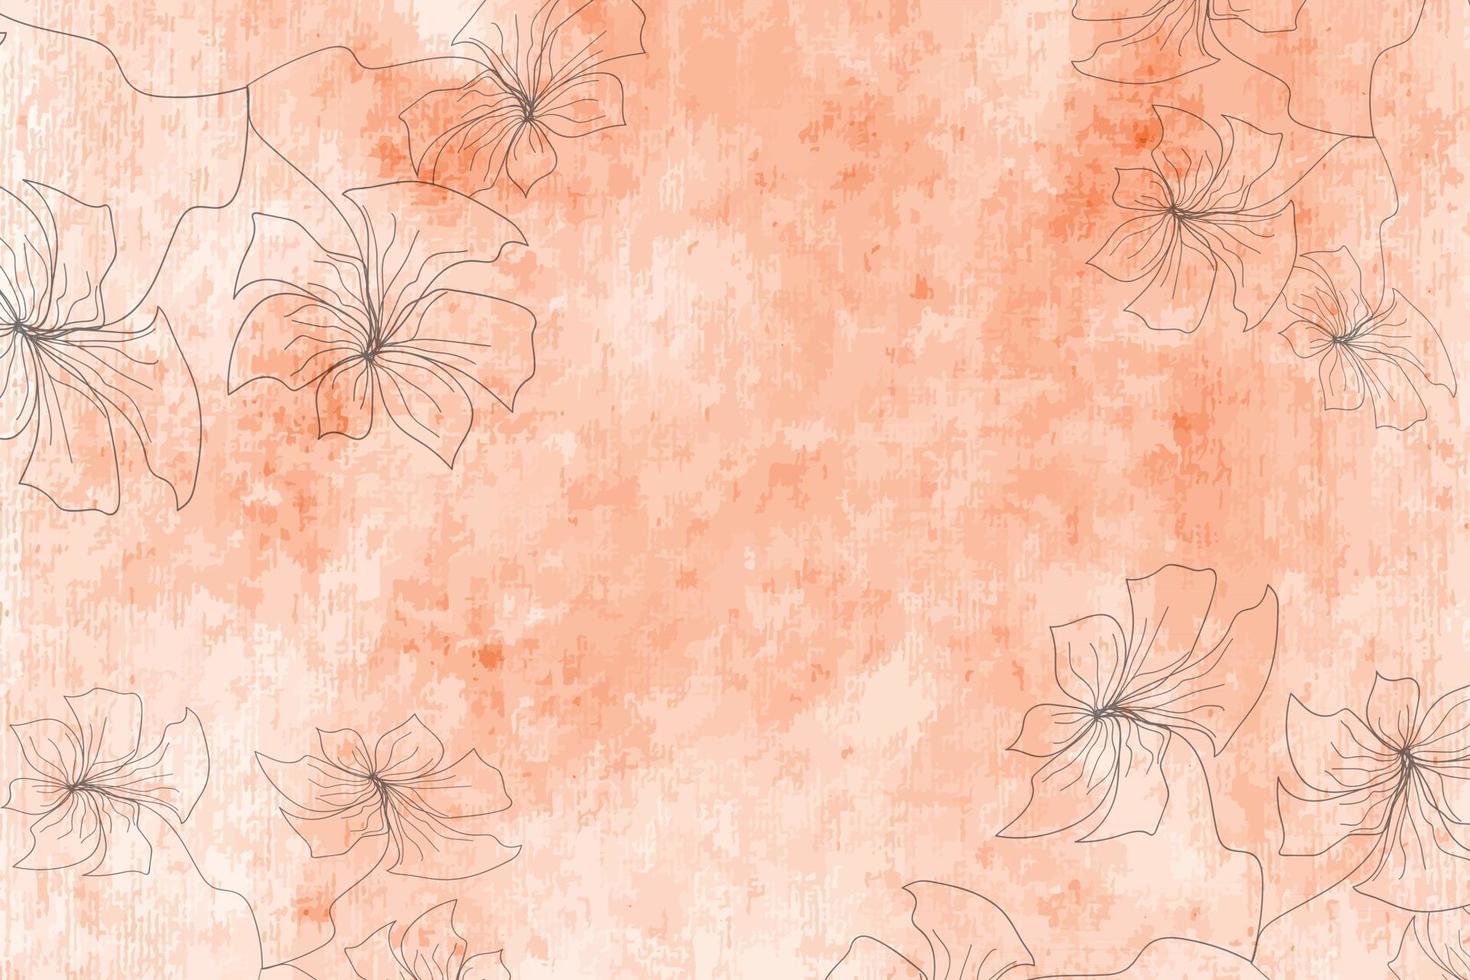 Floral with red watercolor hand painted background vector